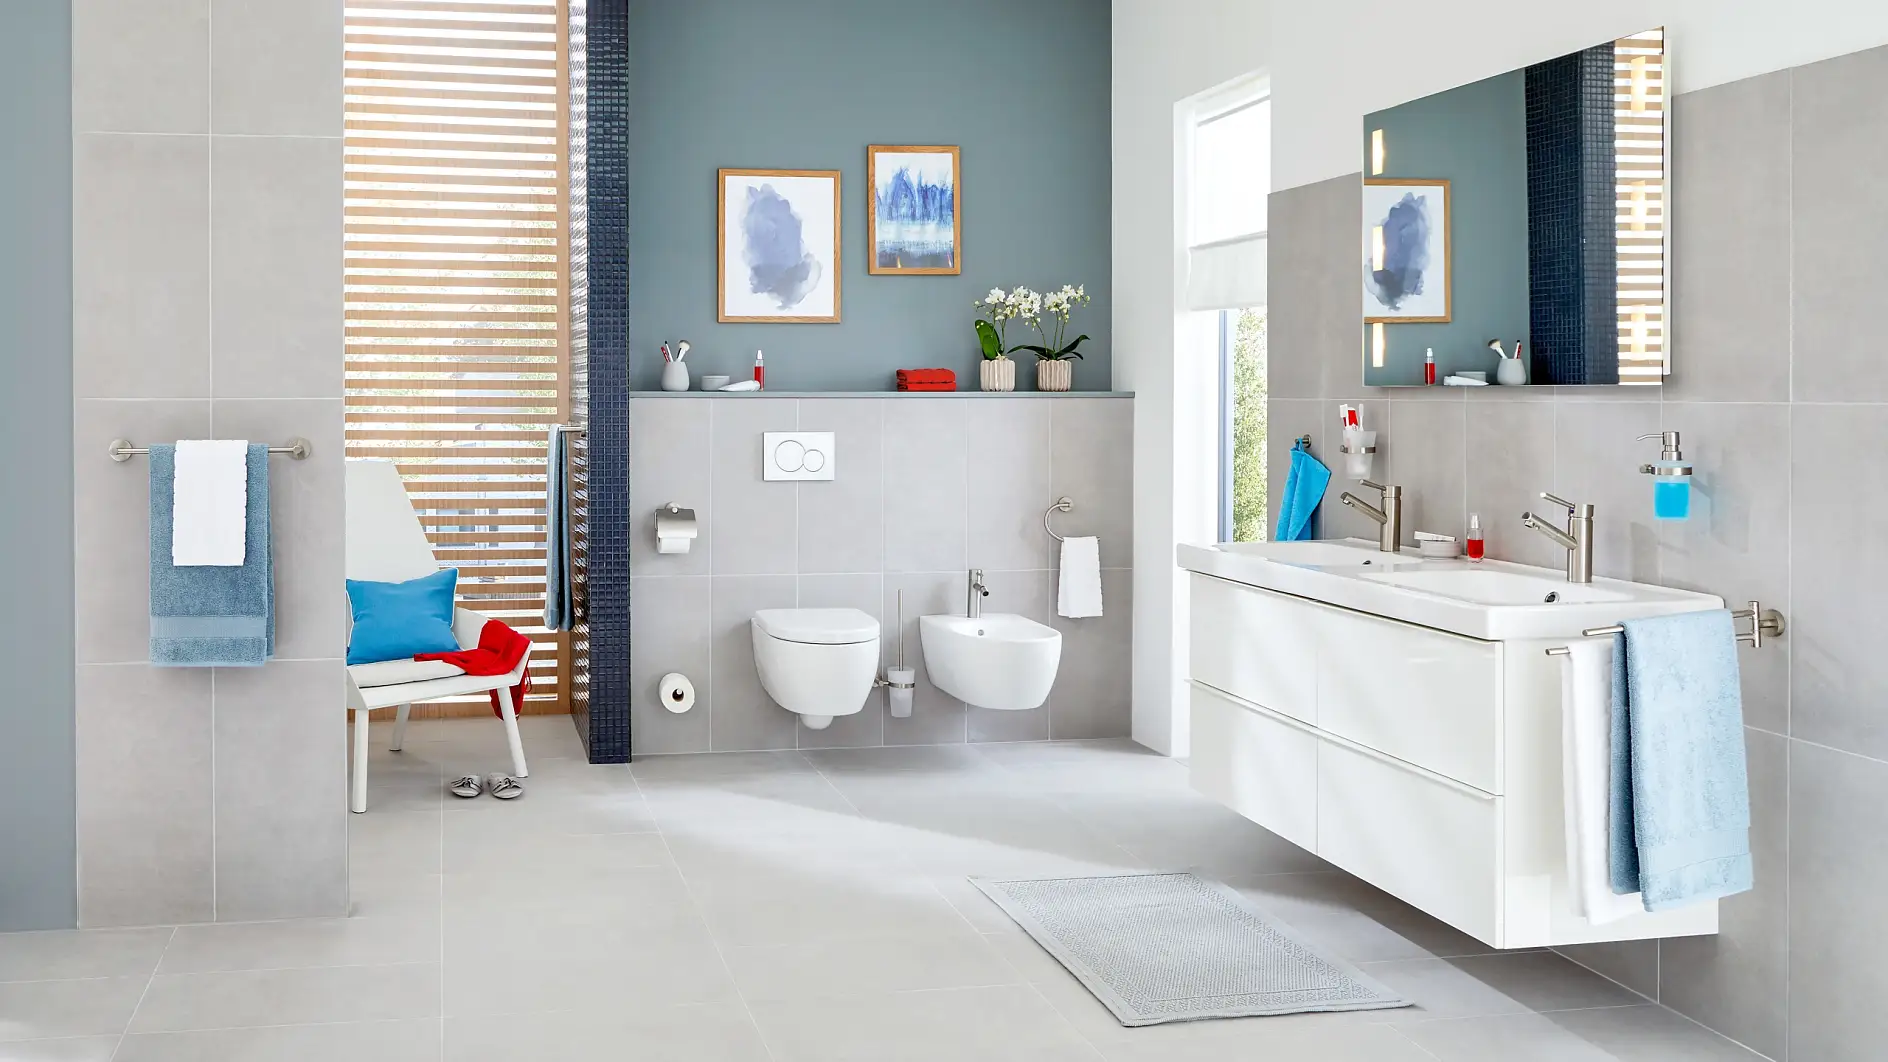 Designed to perfect the exquisite appearance of your bathroom.